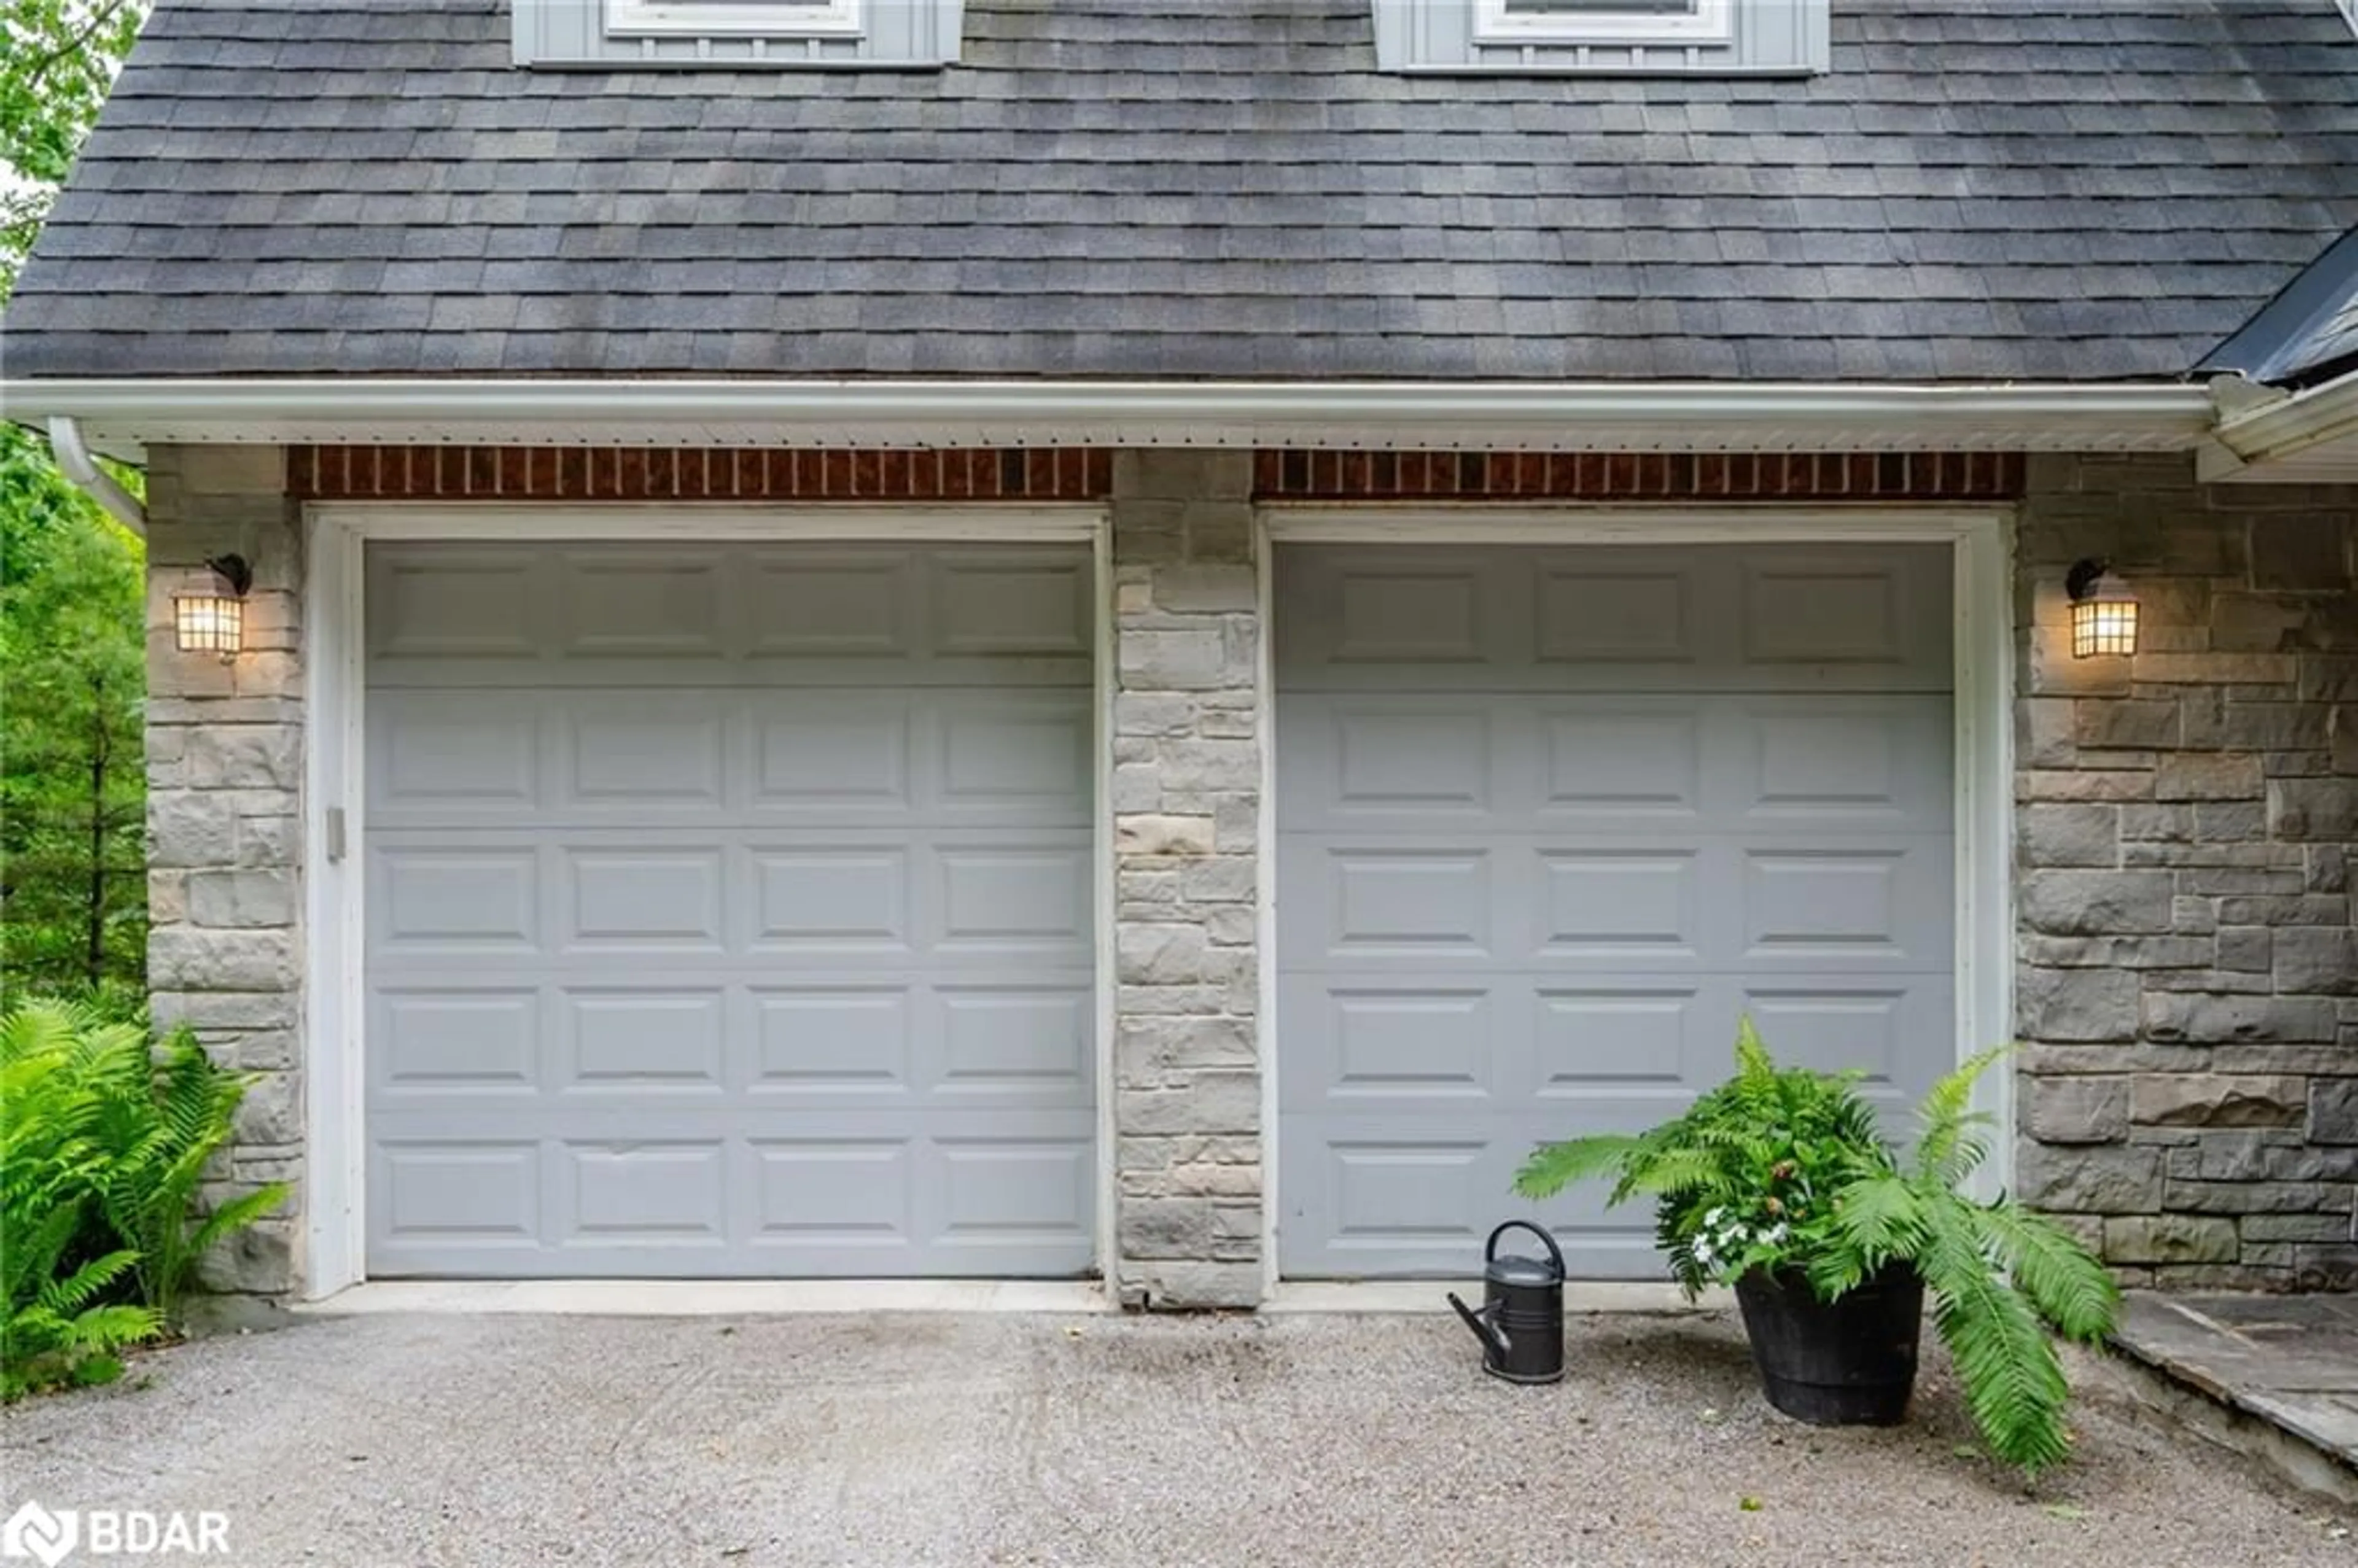 Indoor garage for 6 Pine Point, Barrie Ontario L4M 4Y8